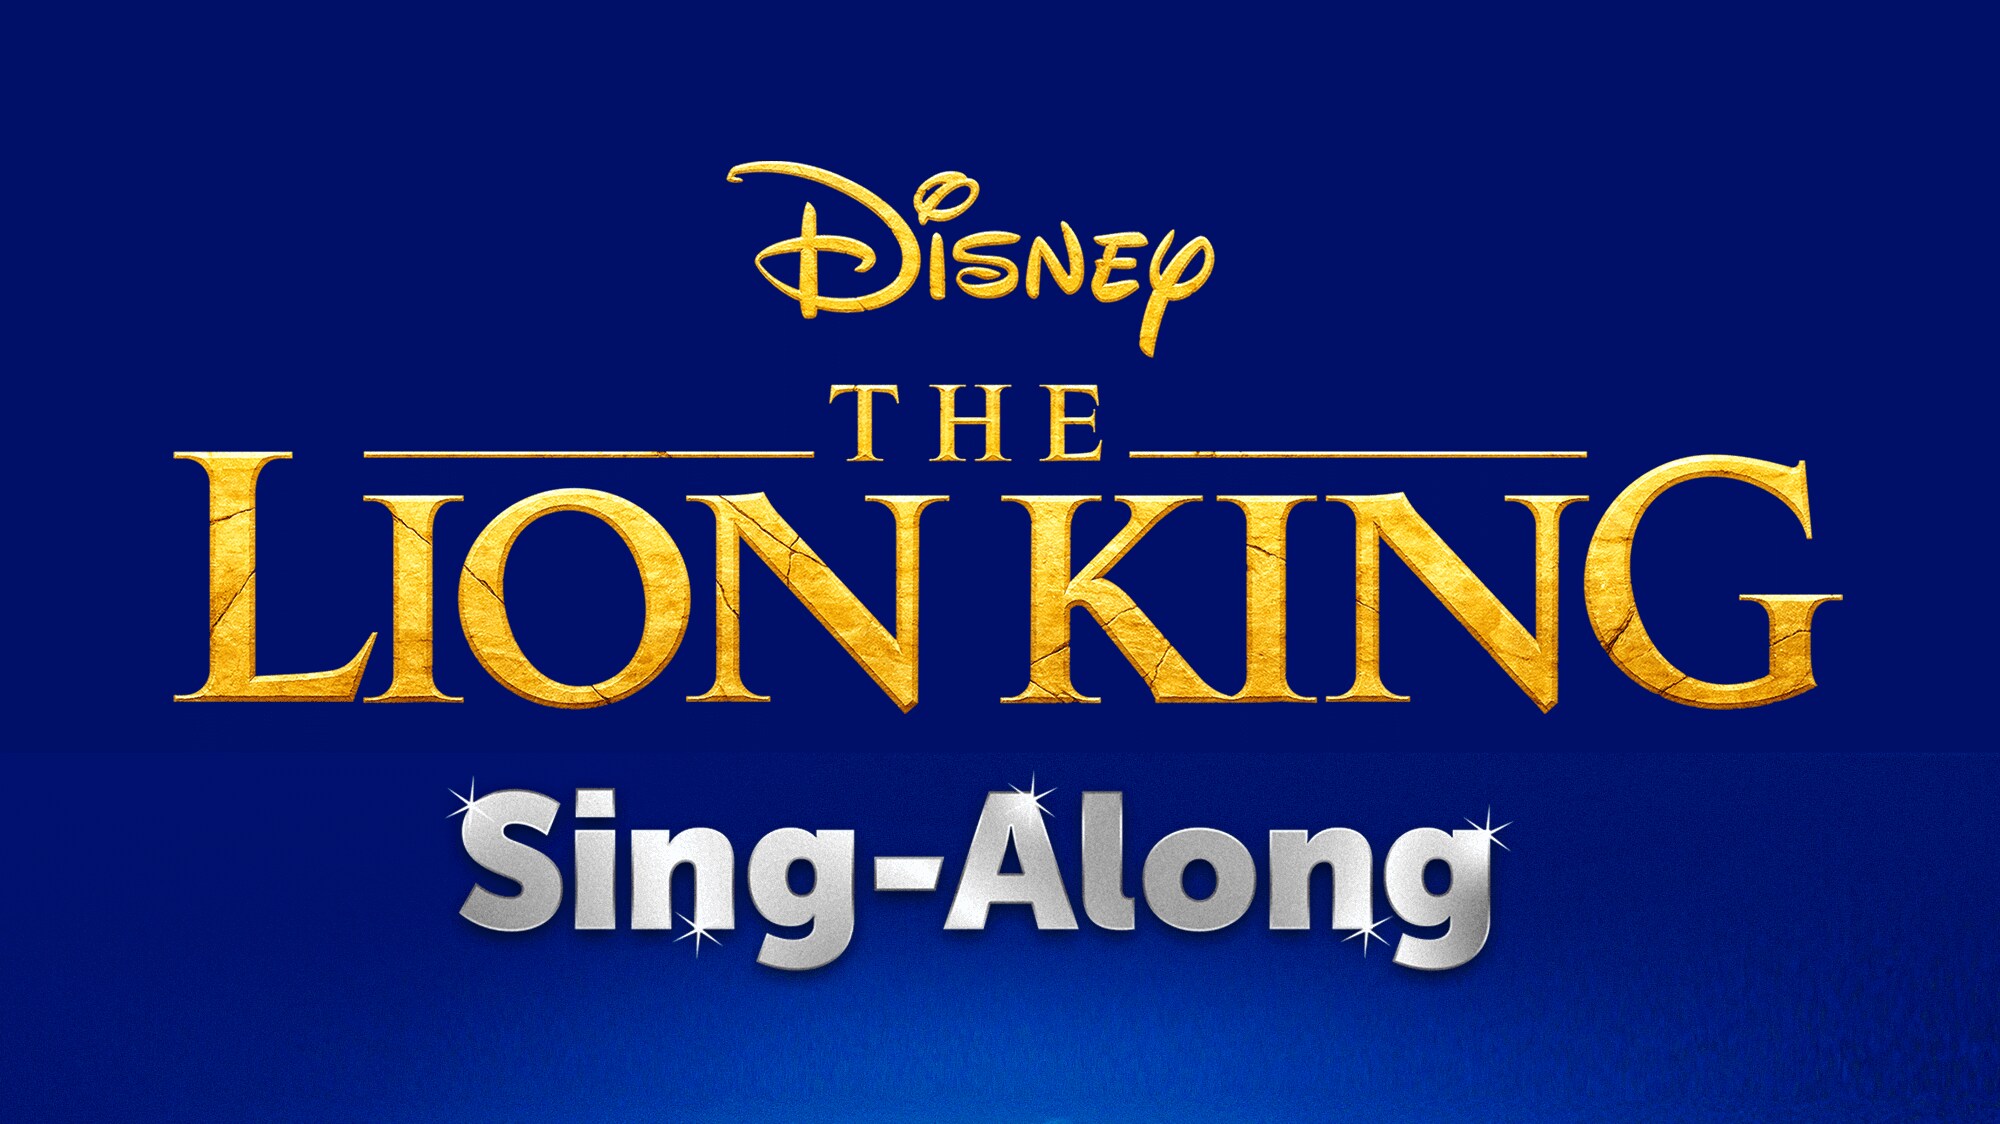 The Lion King (1994) Sing-Along - Vertical